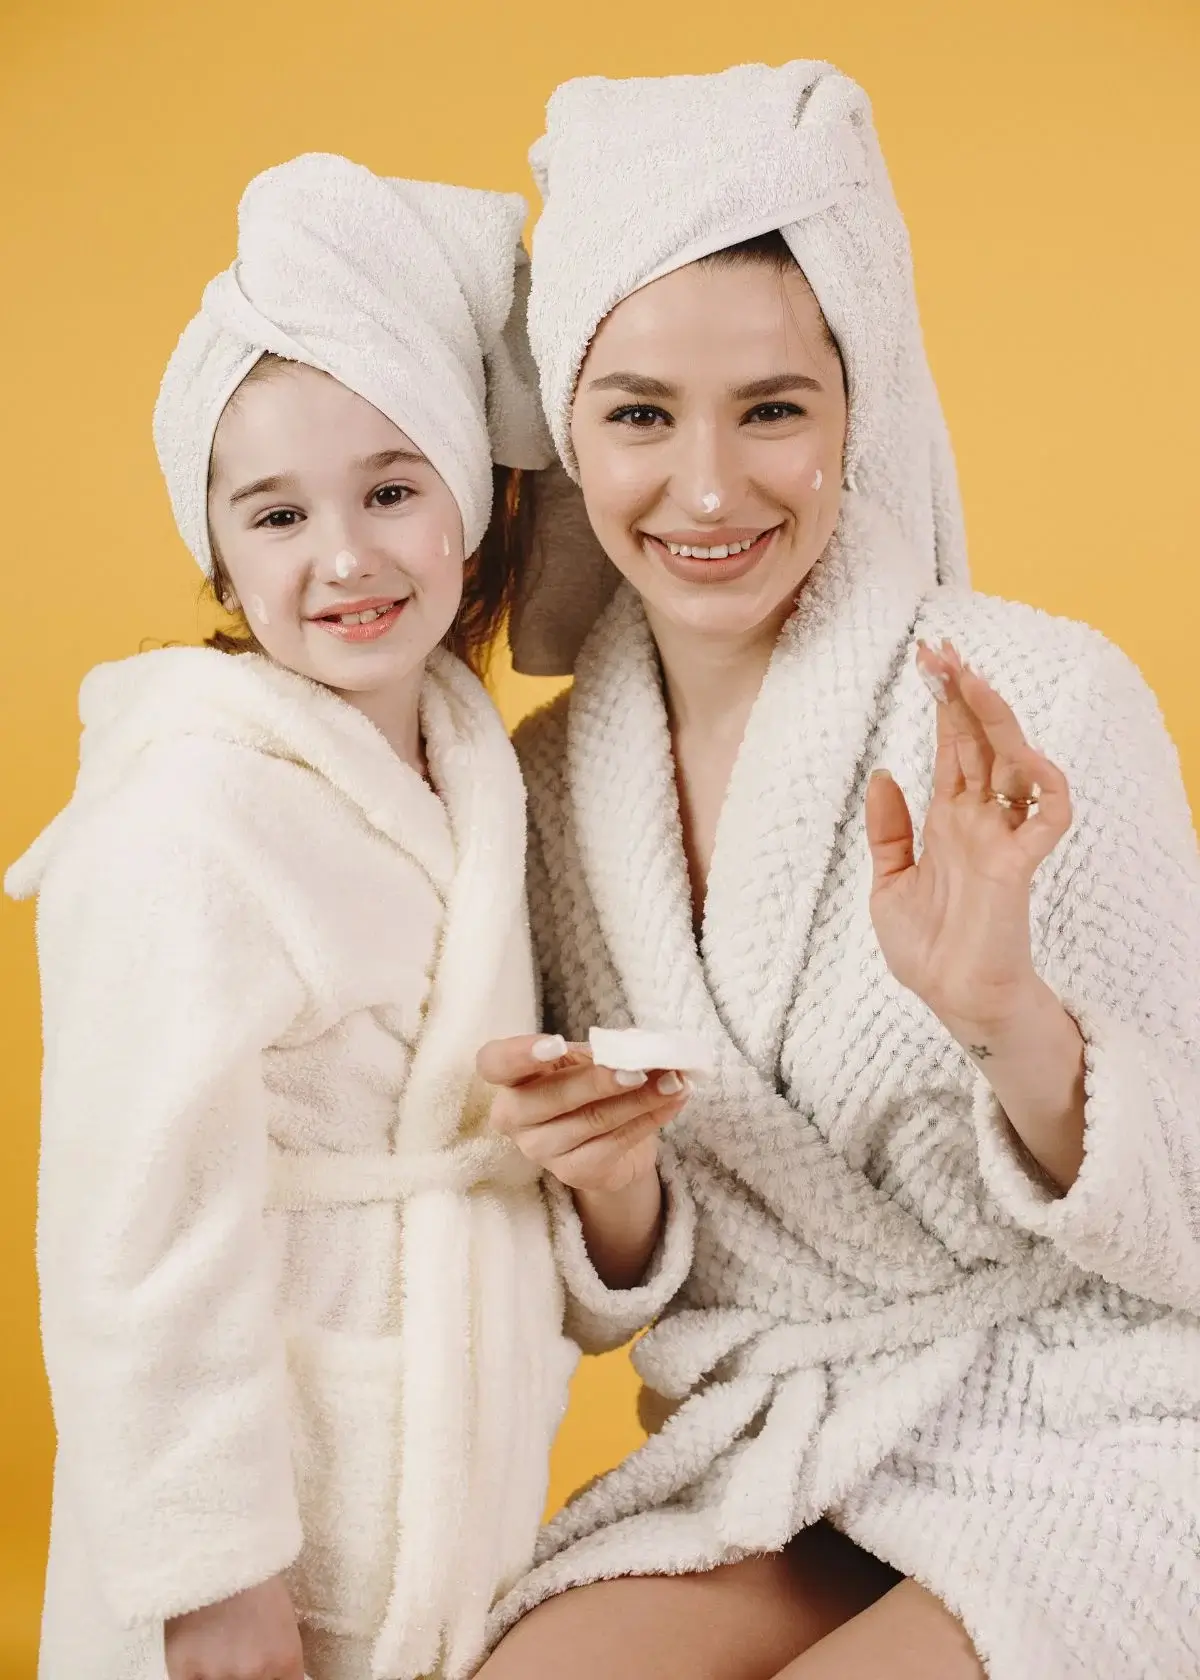 What makes shampoo suitable for kids?